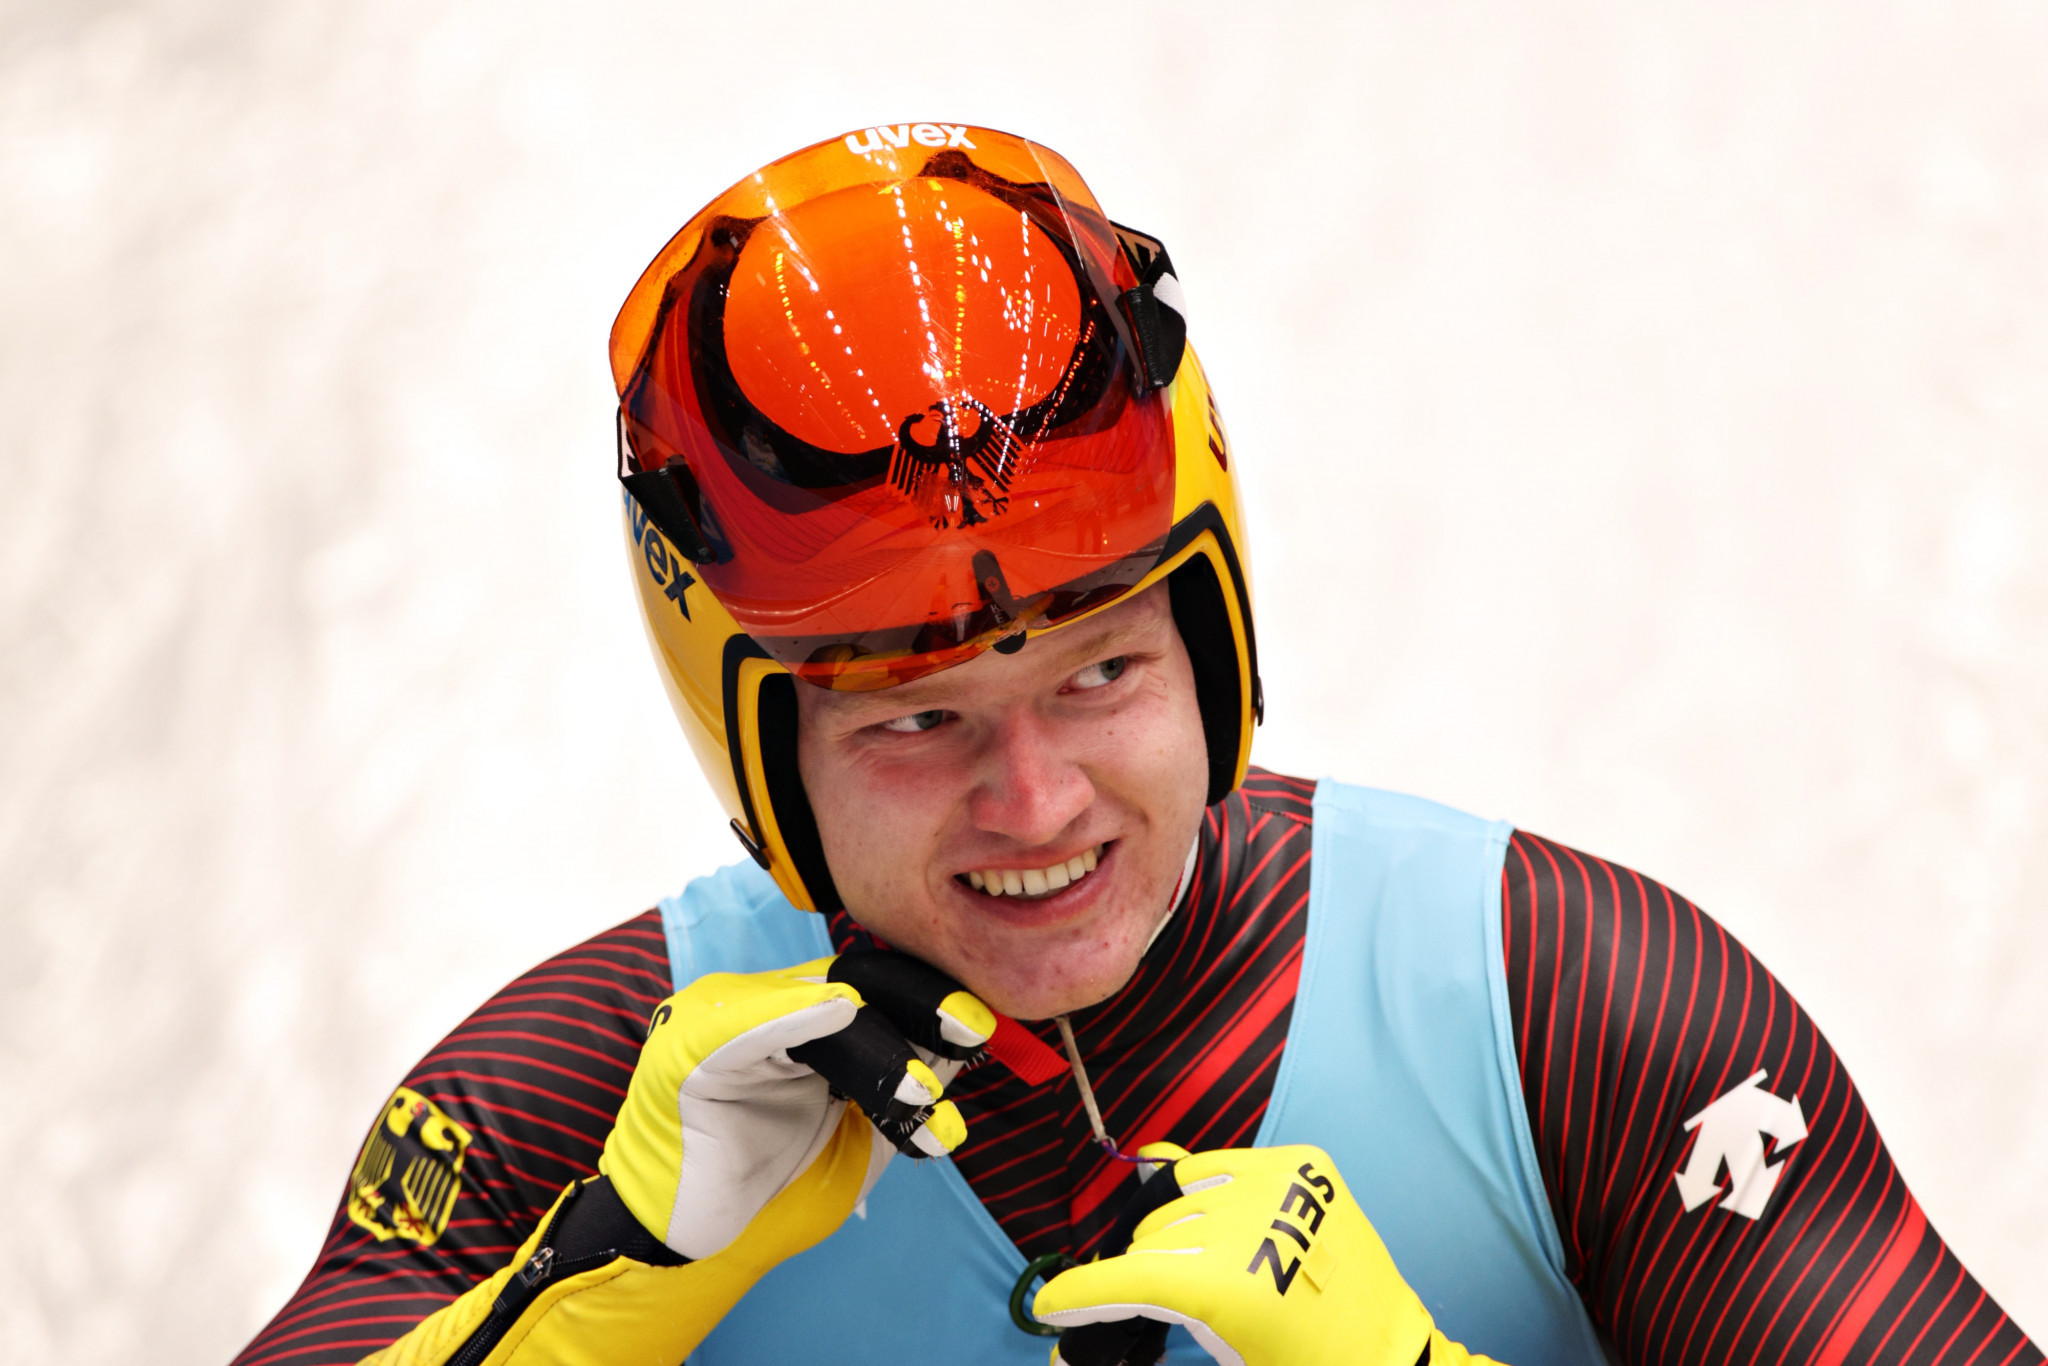 Langenhan continues fine form at Luge World Cup in St Moritz